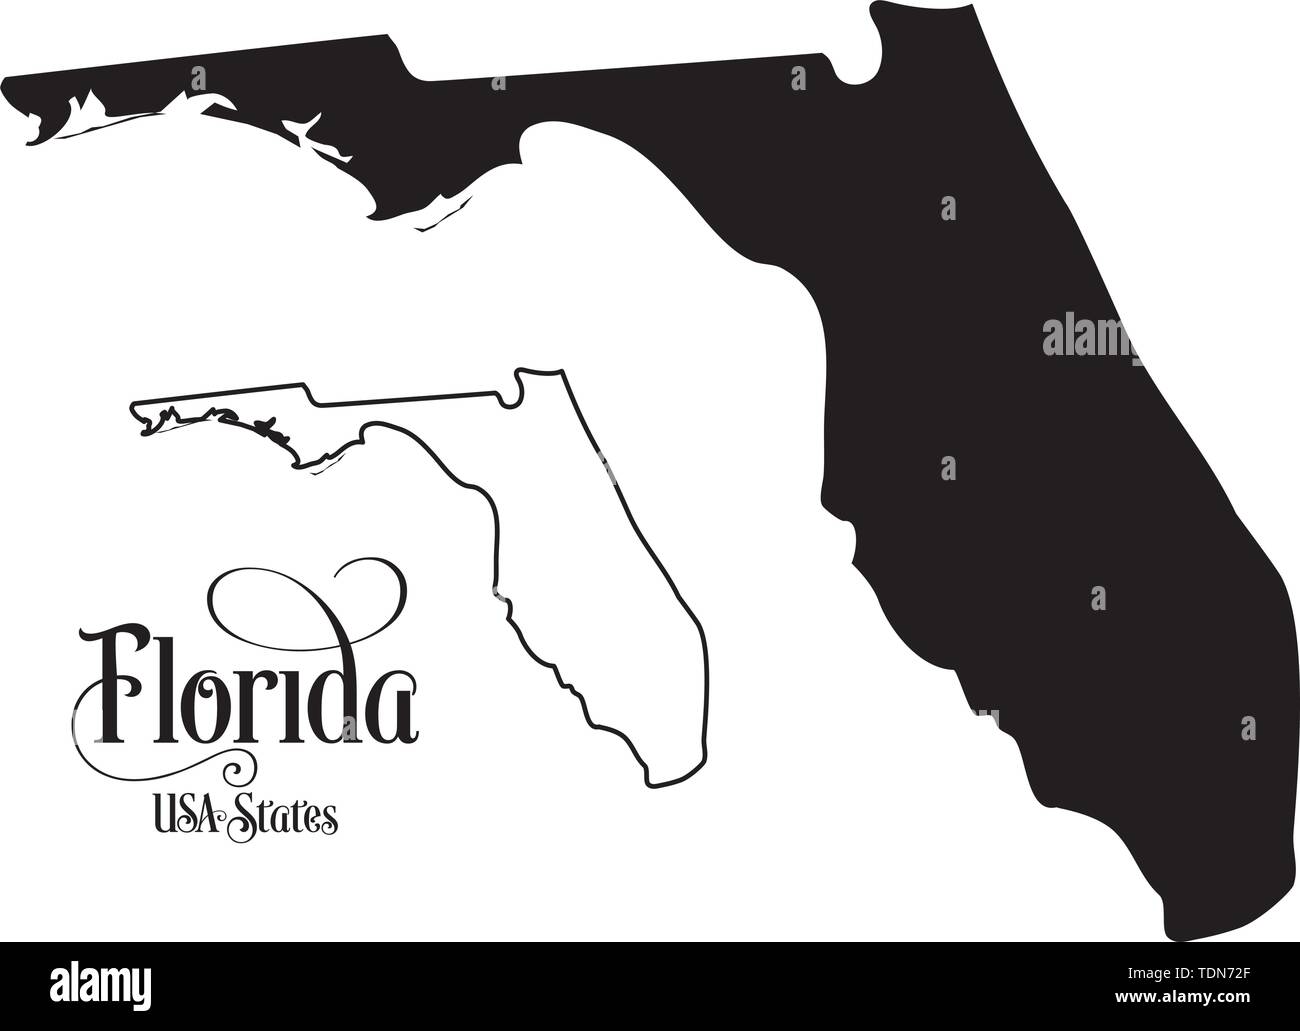 Map of The United States of America (USA) State of Florida - Illustration on White Background. Stock Vector